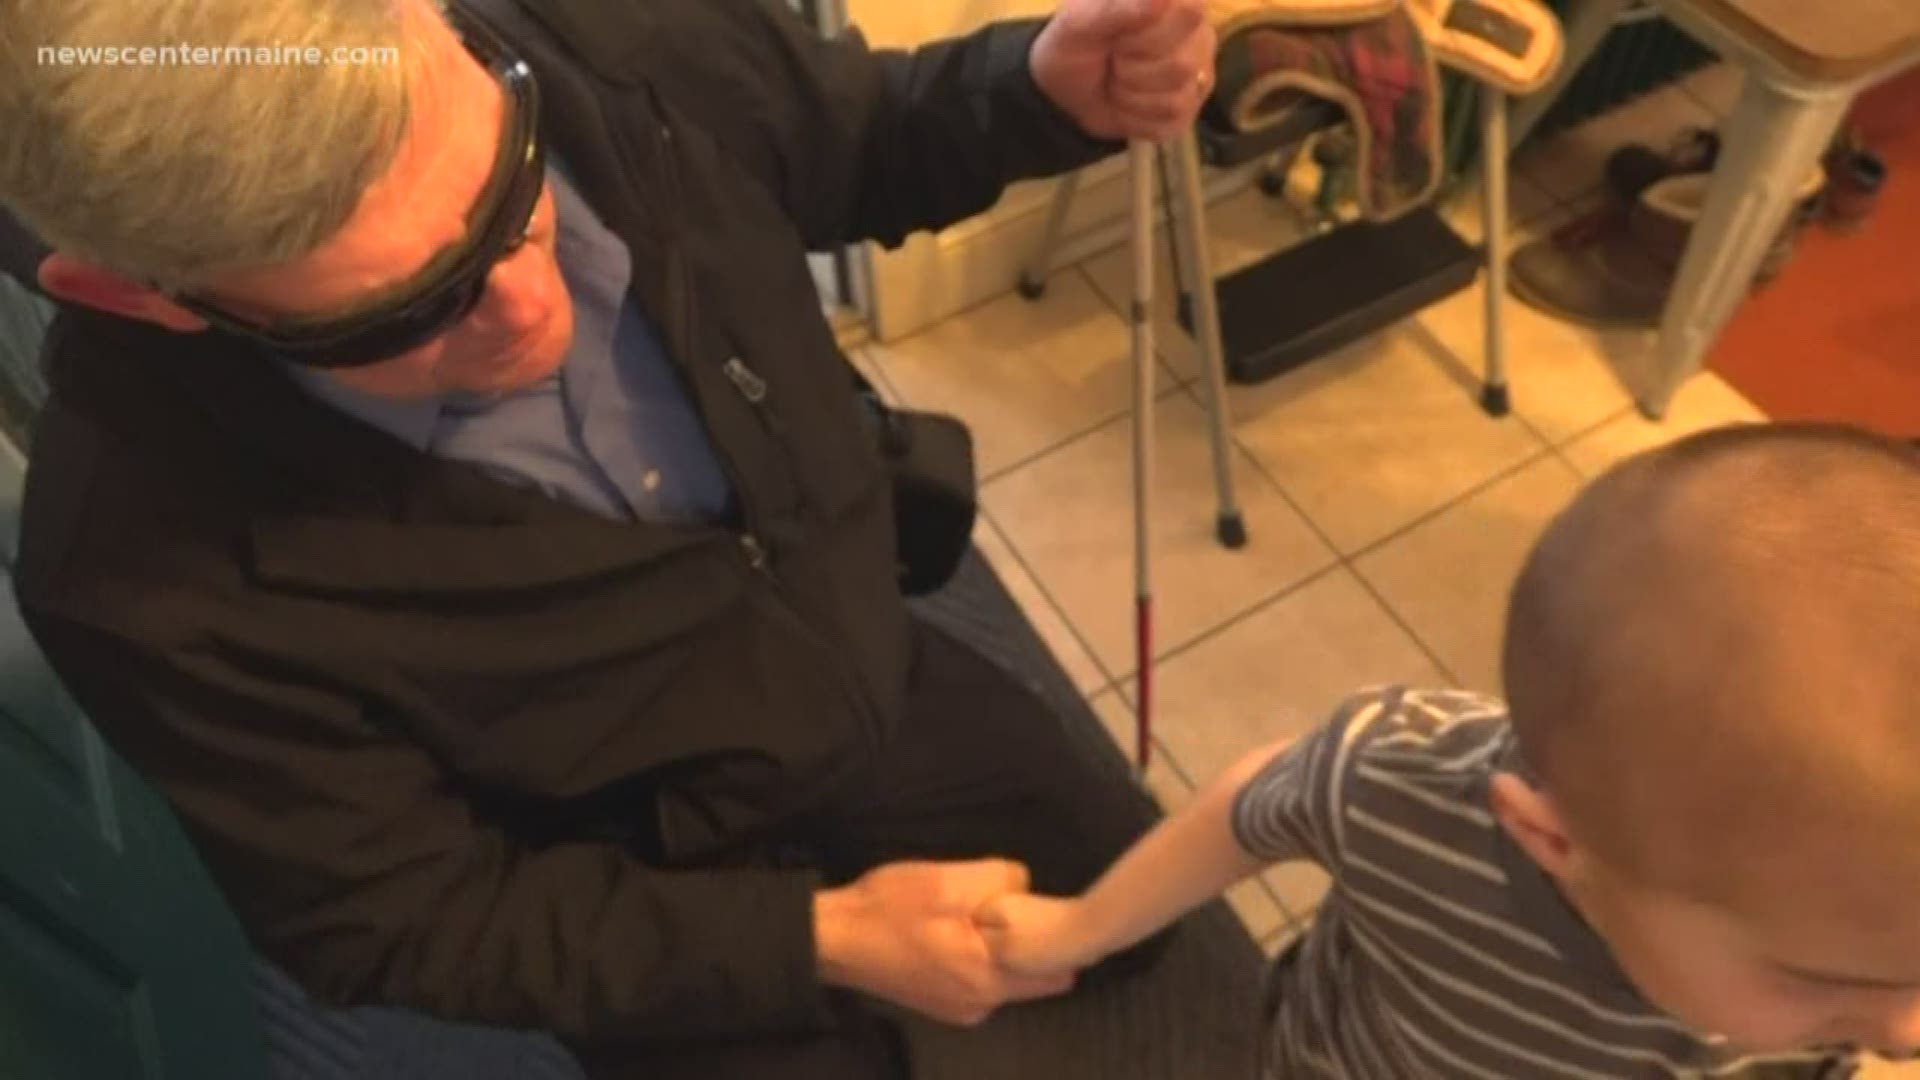 Blind boy's story resonates with blind man who uses new technology to 'see' again